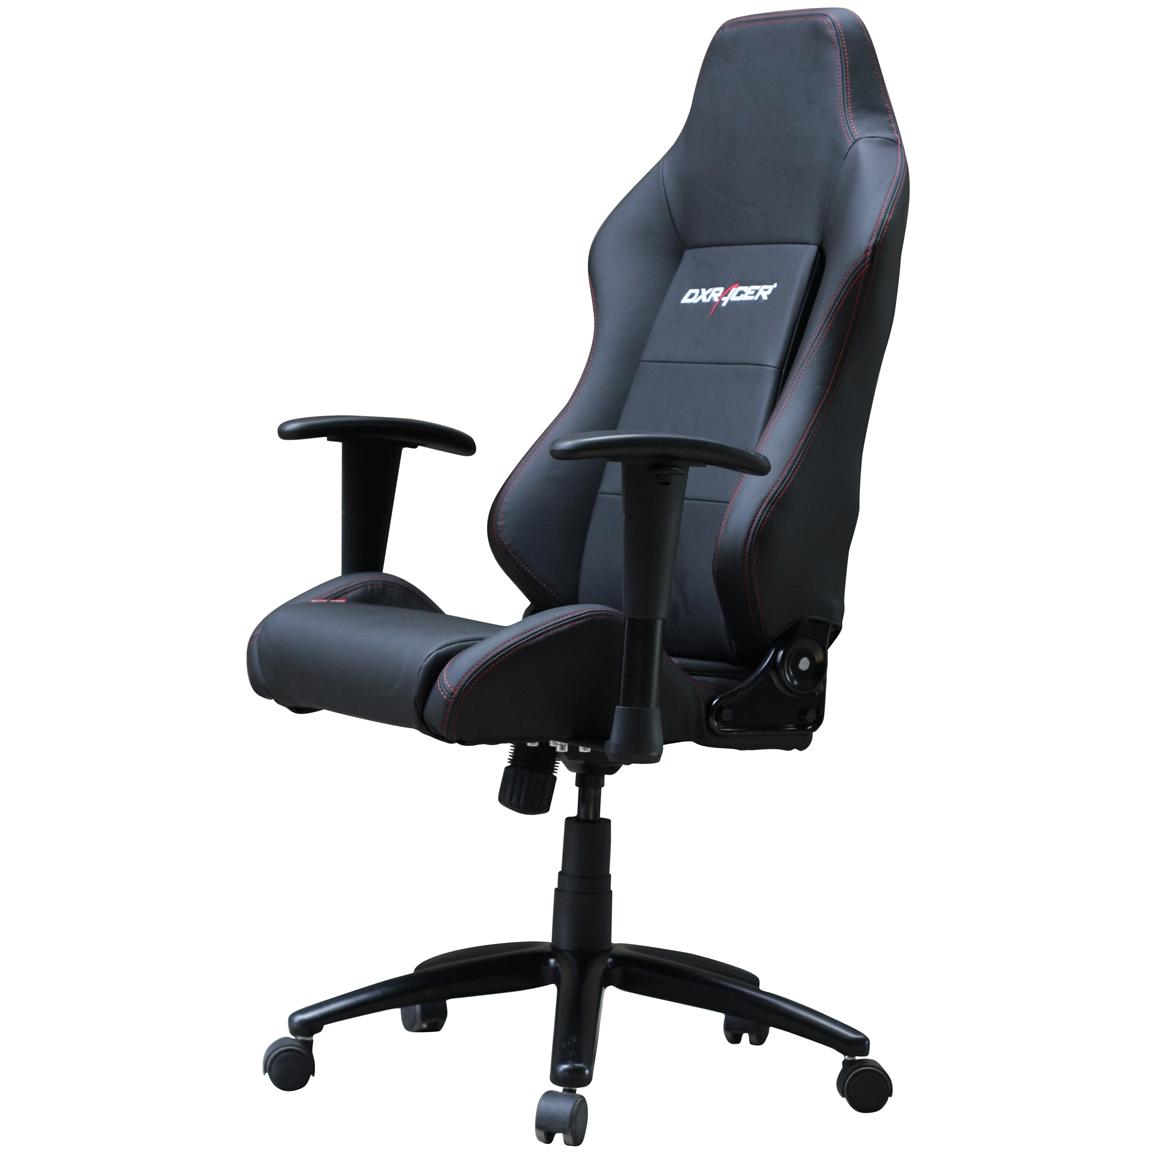 Dx Racer OH/D01 Vinyl Gaming Chair 210297, Office at